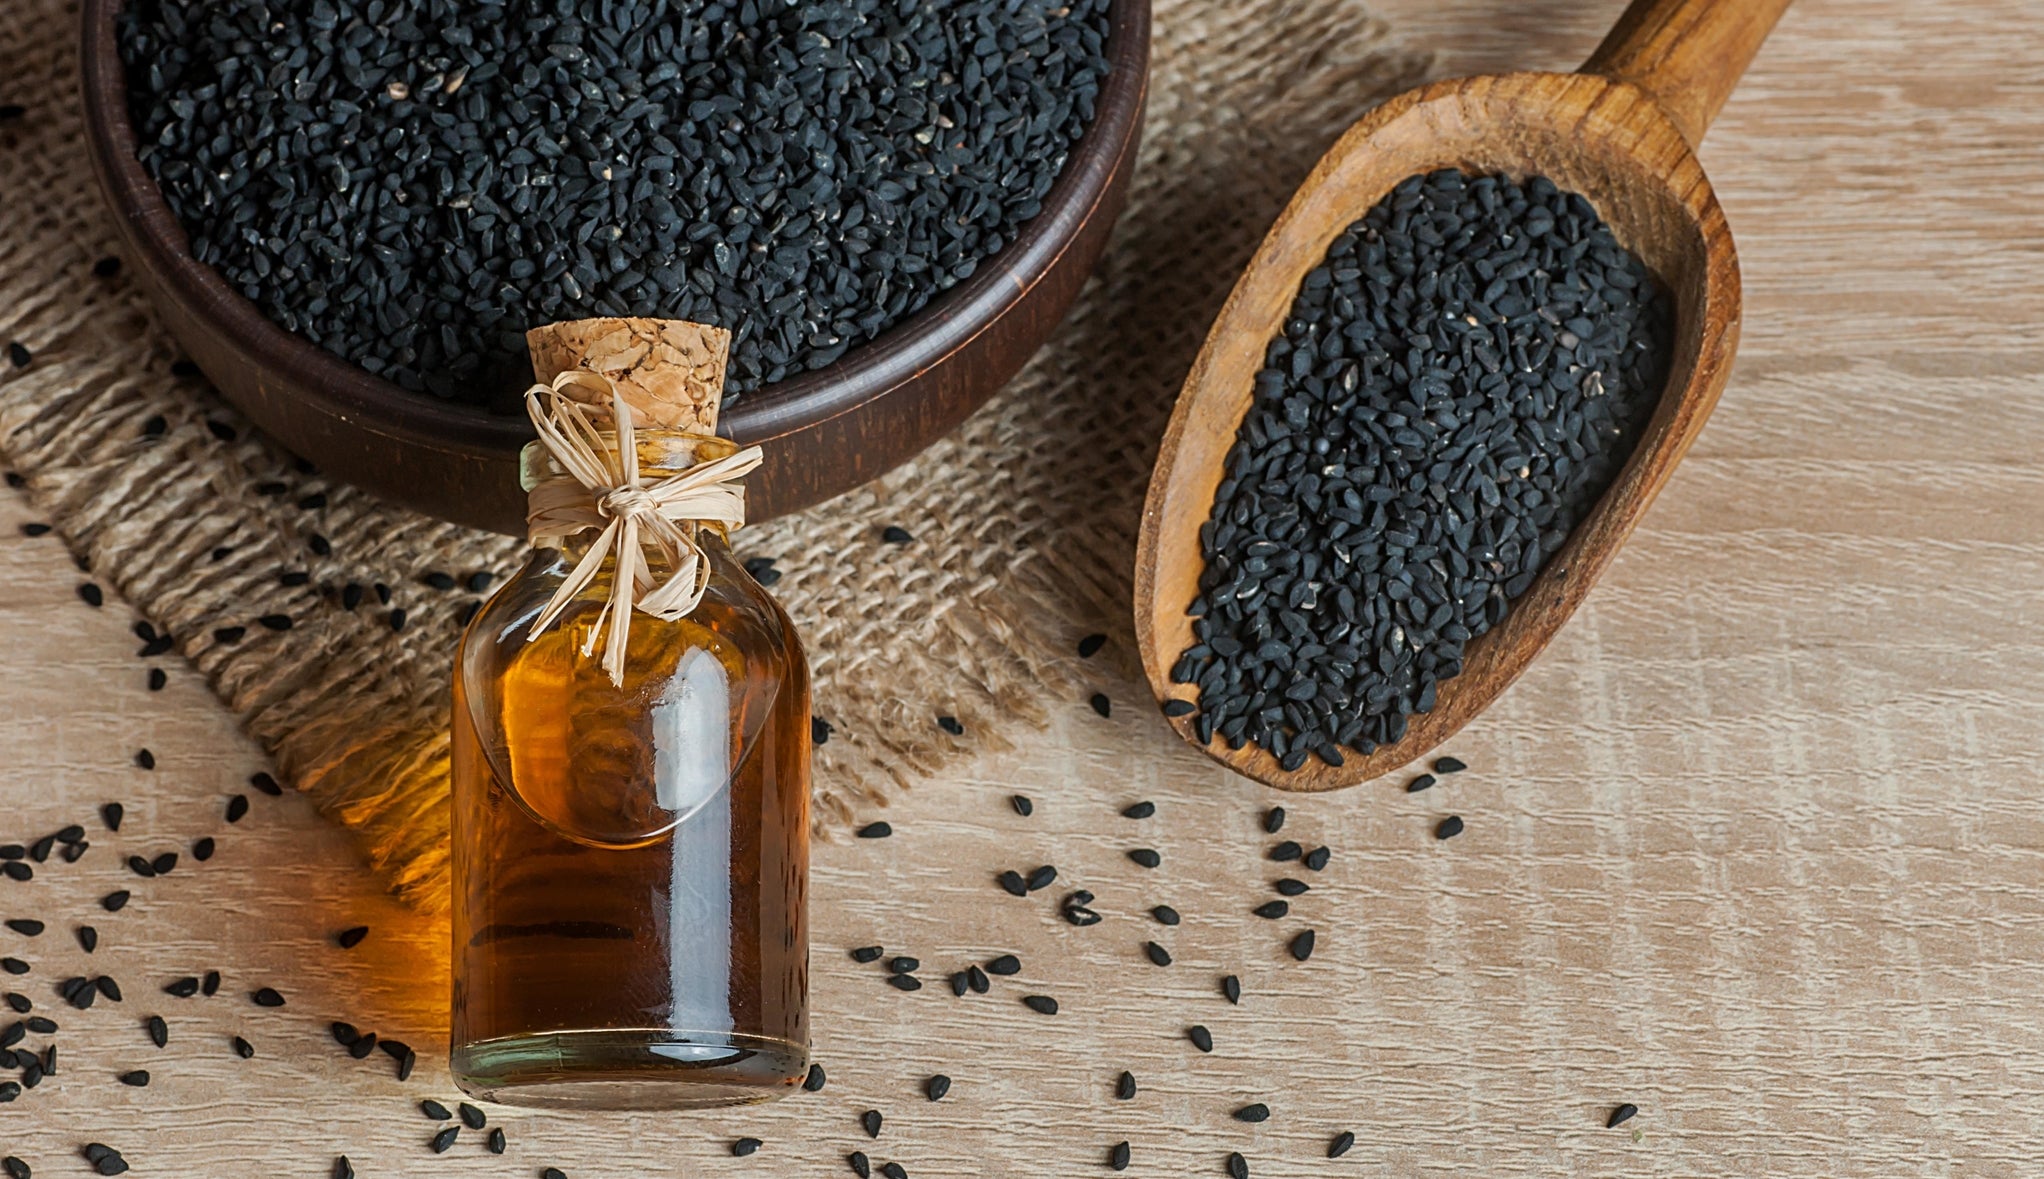 What Are the Benefits of Black Cumin Seed Oil? - Puristry